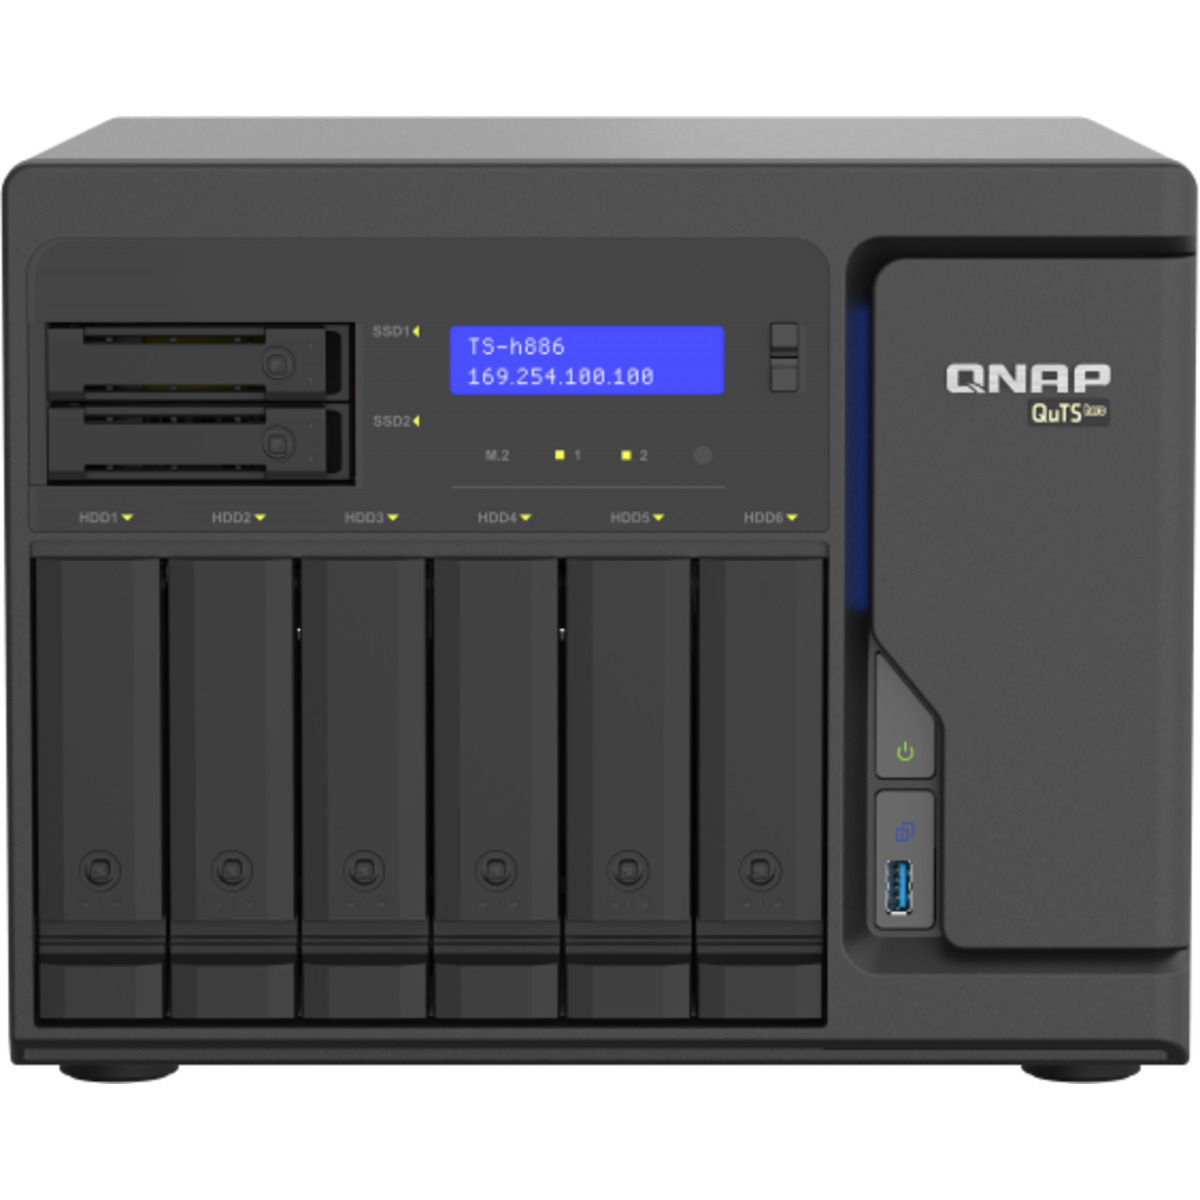 QNAP TS-h886 QuTS hero NAS 42tb 6+2-Bay Desktop Large Business / Enterprise NAS - Network Attached Storage Device 3x14tb Seagate IronWolf ST14000VN0008 3.5 7200rpm SATA 6Gb/s HDD NAS Class Drives Installed - Burn-In Tested TS-h886 QuTS hero NAS